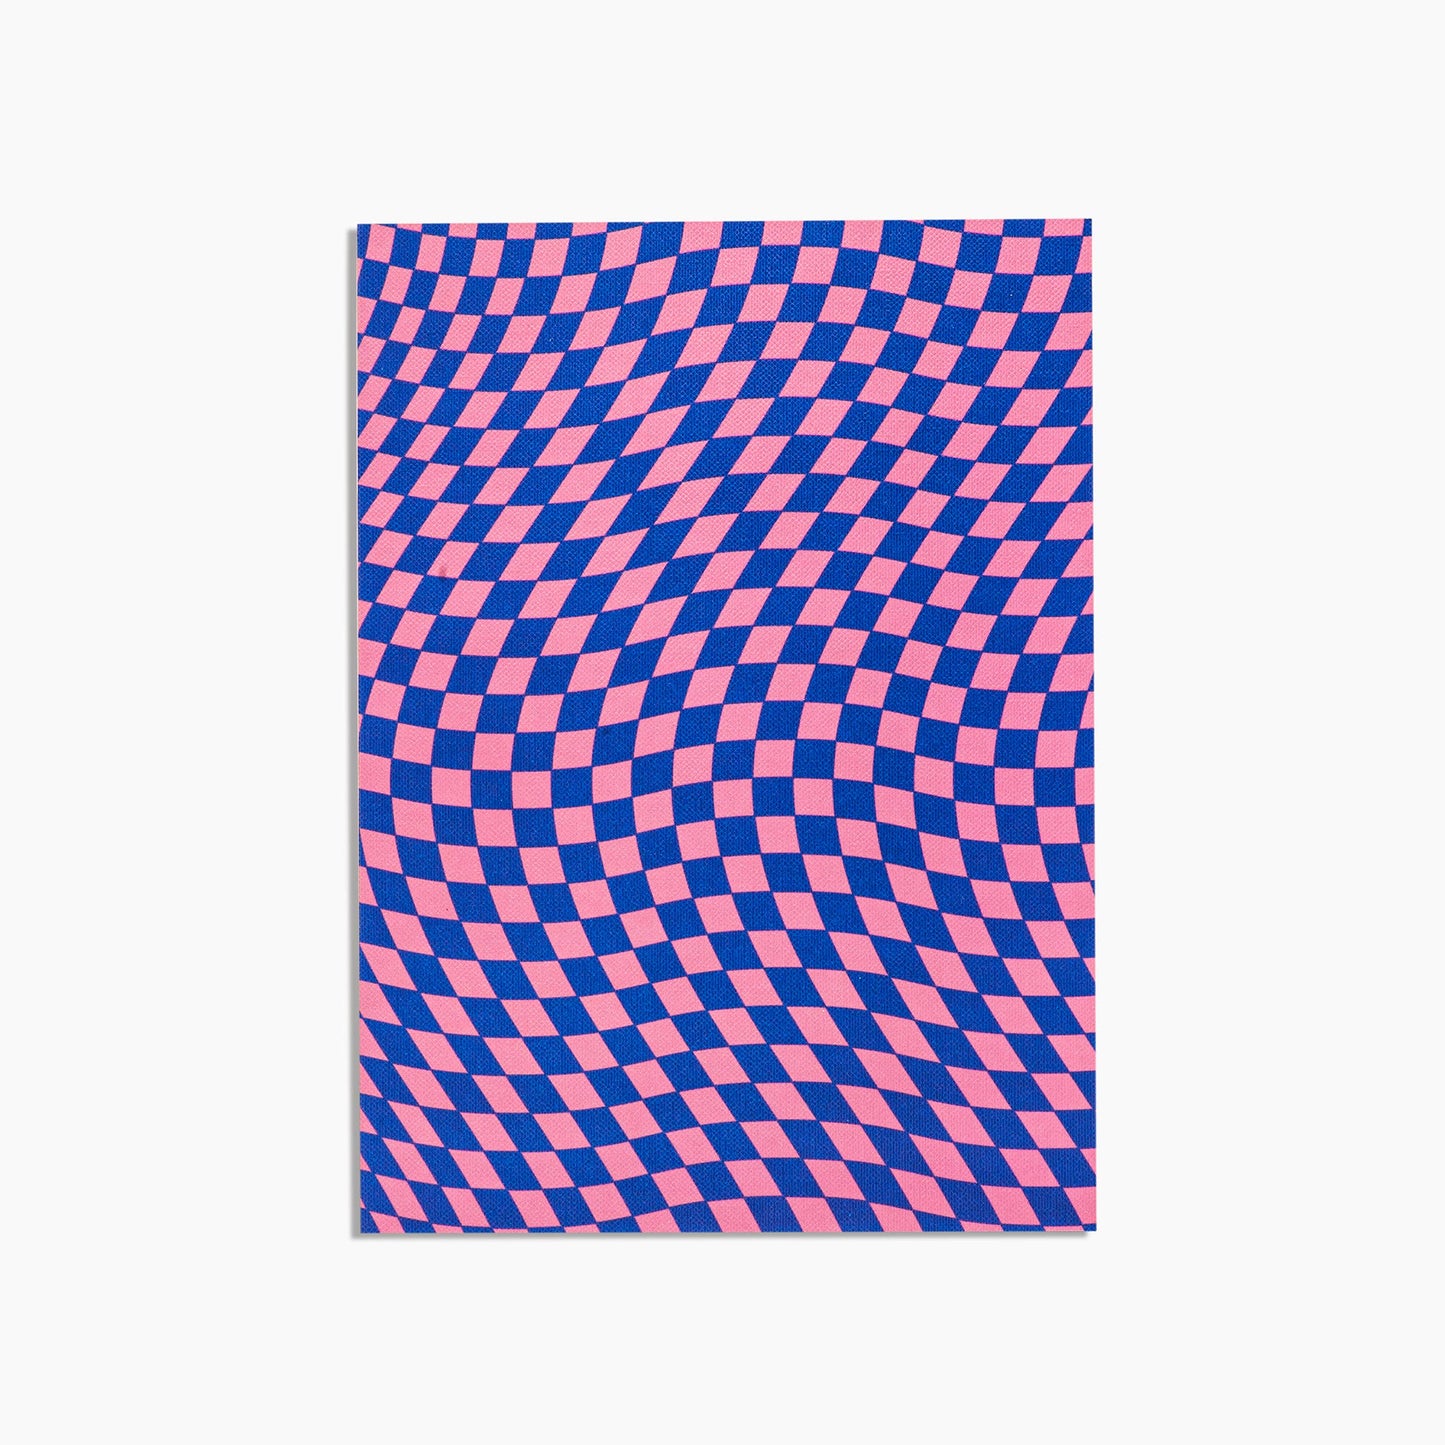 Rose & Navy Checkered Object Notebook